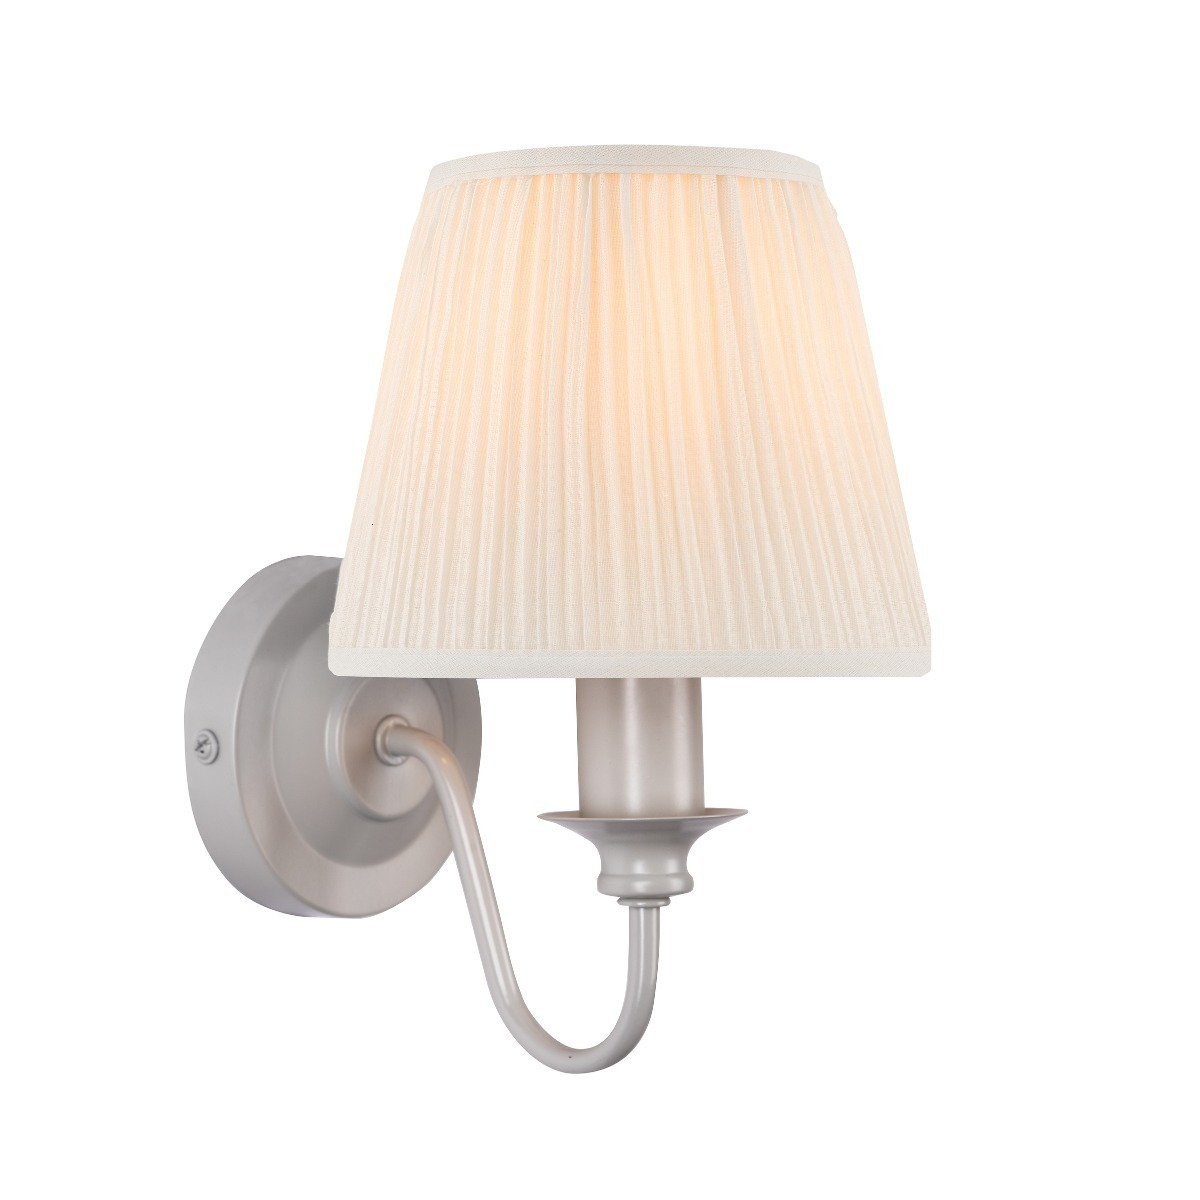 Laura Ashley Ellis Single Wall Light In Satin Grey With Ivory Cotton Shade